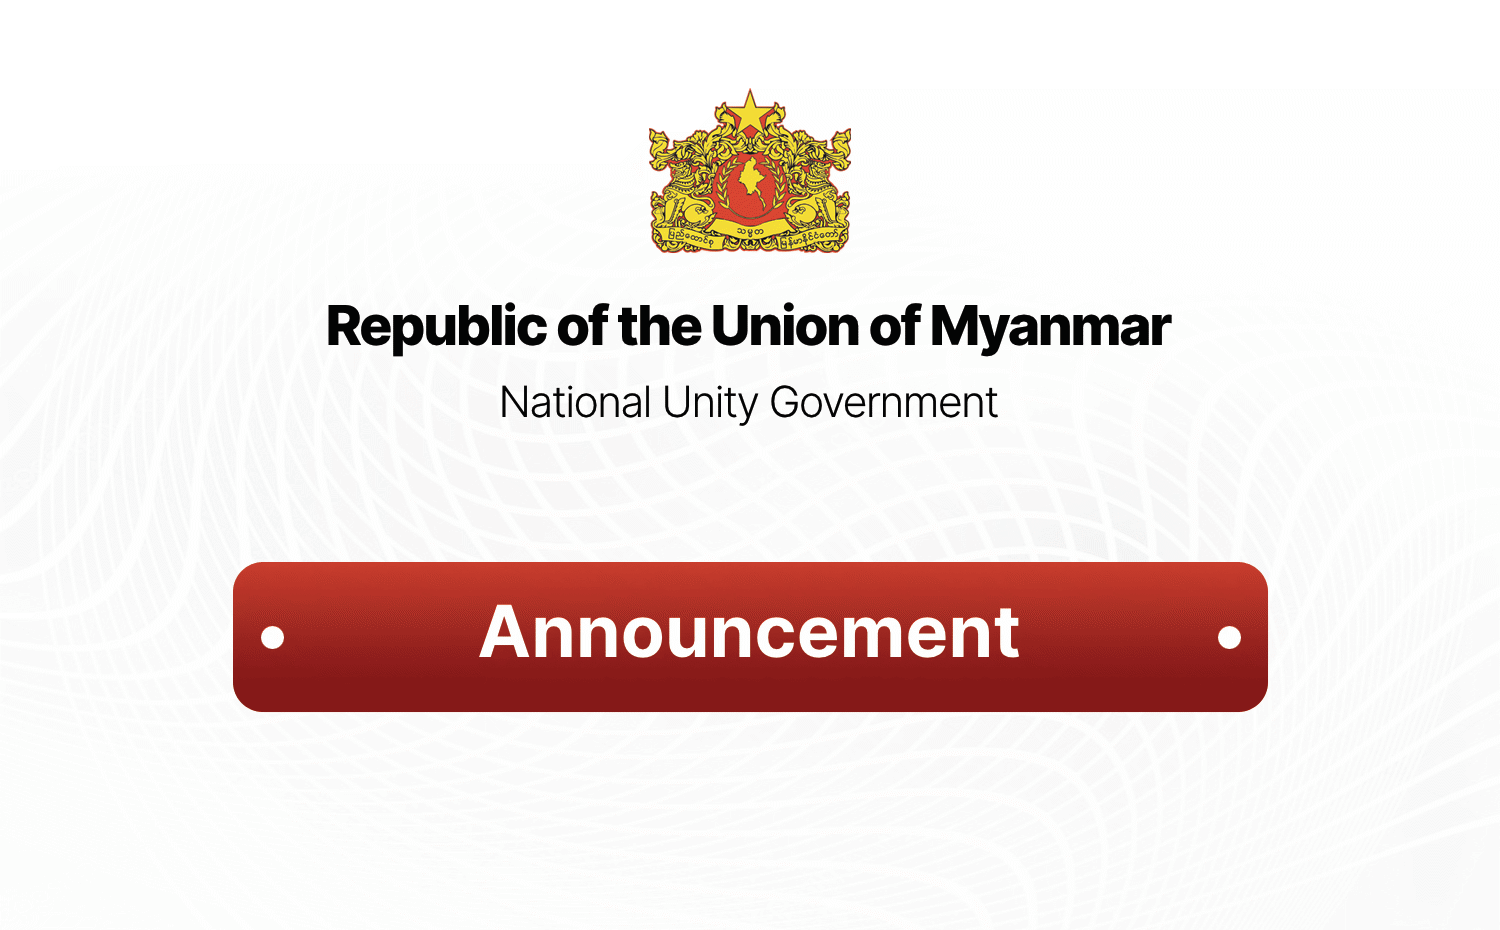 Joint Statement by the Ministry of Women, Youths and Children Affairs & Ministry of Human Rights Affairs of the National Unity Government of Myanmar (3/2021)